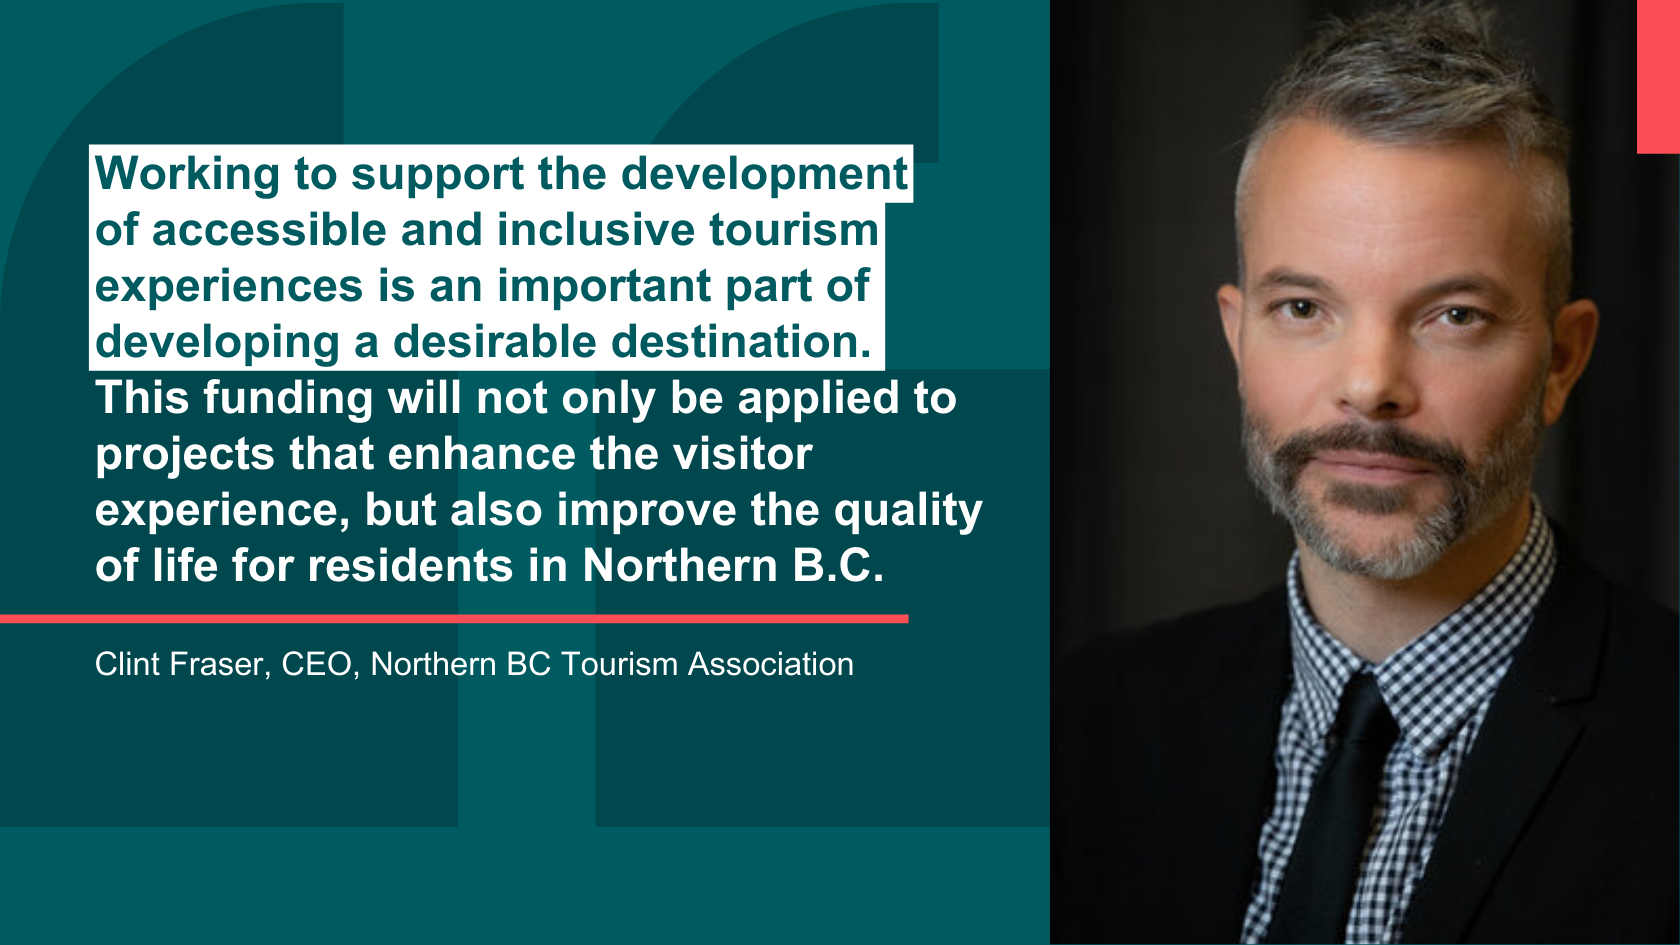 Quote image showing the headshot of Clint Fraser, CEO, Northern BC Tourism Association, alongside his quote that reads "Working to support the development of accessible and inclusive tourism experiences is an important part of developing a desirable destination. This funding will not only be applied to projects that enhance the visitor experience, but also improve the quality of life for residents in Northern B.C."